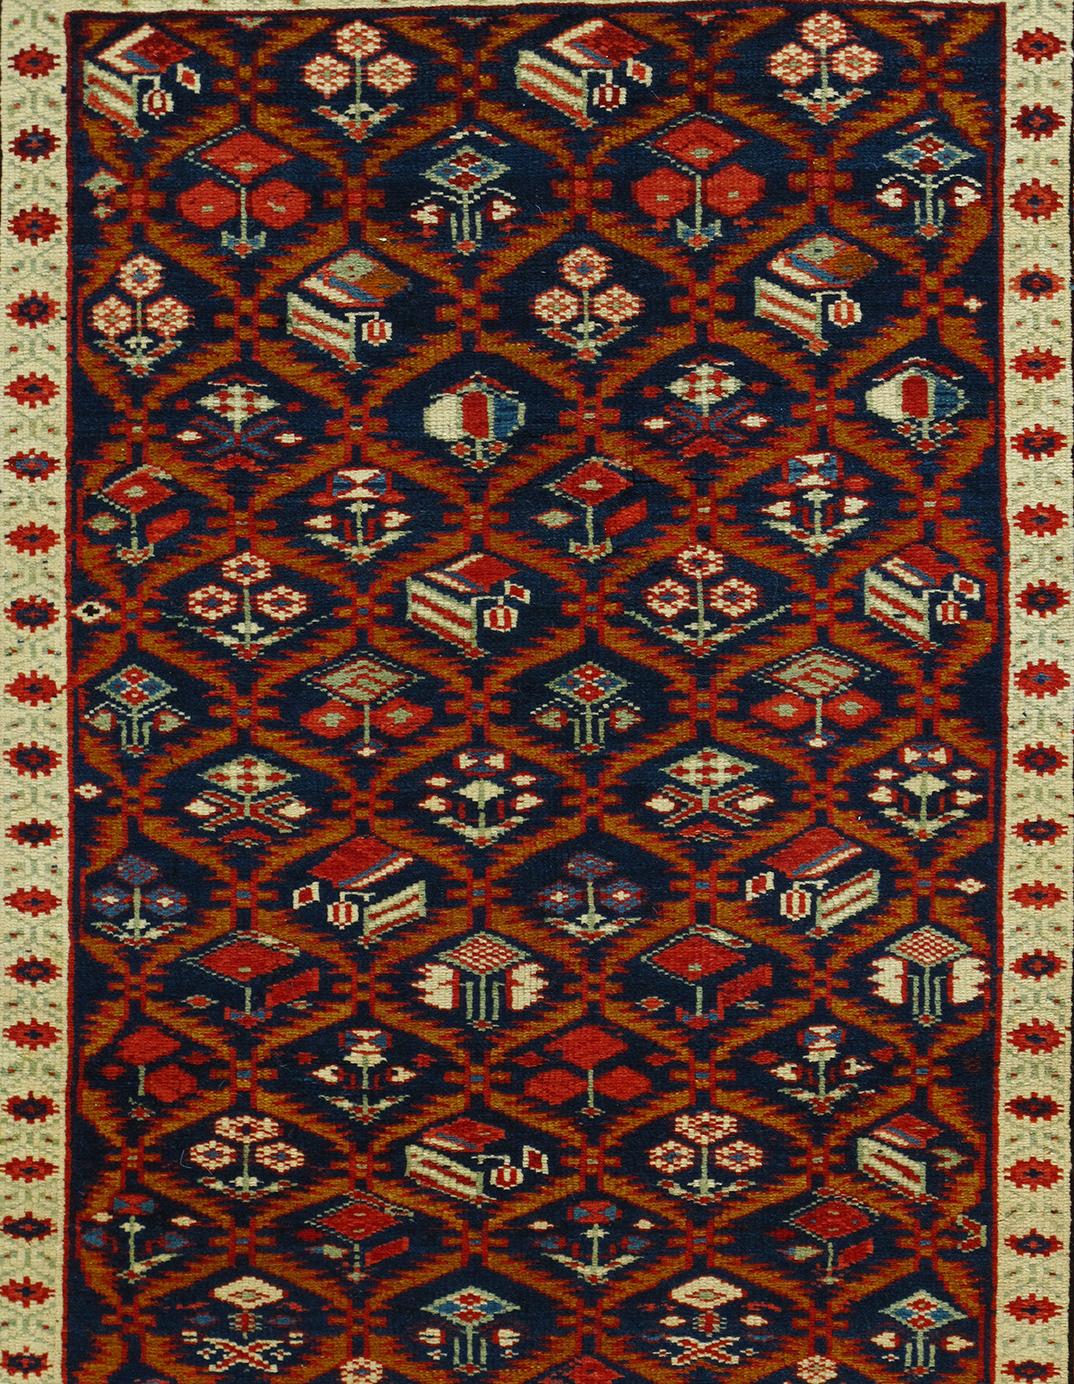 This antique Caucasian Shirvan tribal rug is from Azerbaijan, a country located in the south Caucasus region. It is constructed of 100% handspun wool and natural dyes. This rug features a bold, articulated geometric pattern, which is a very